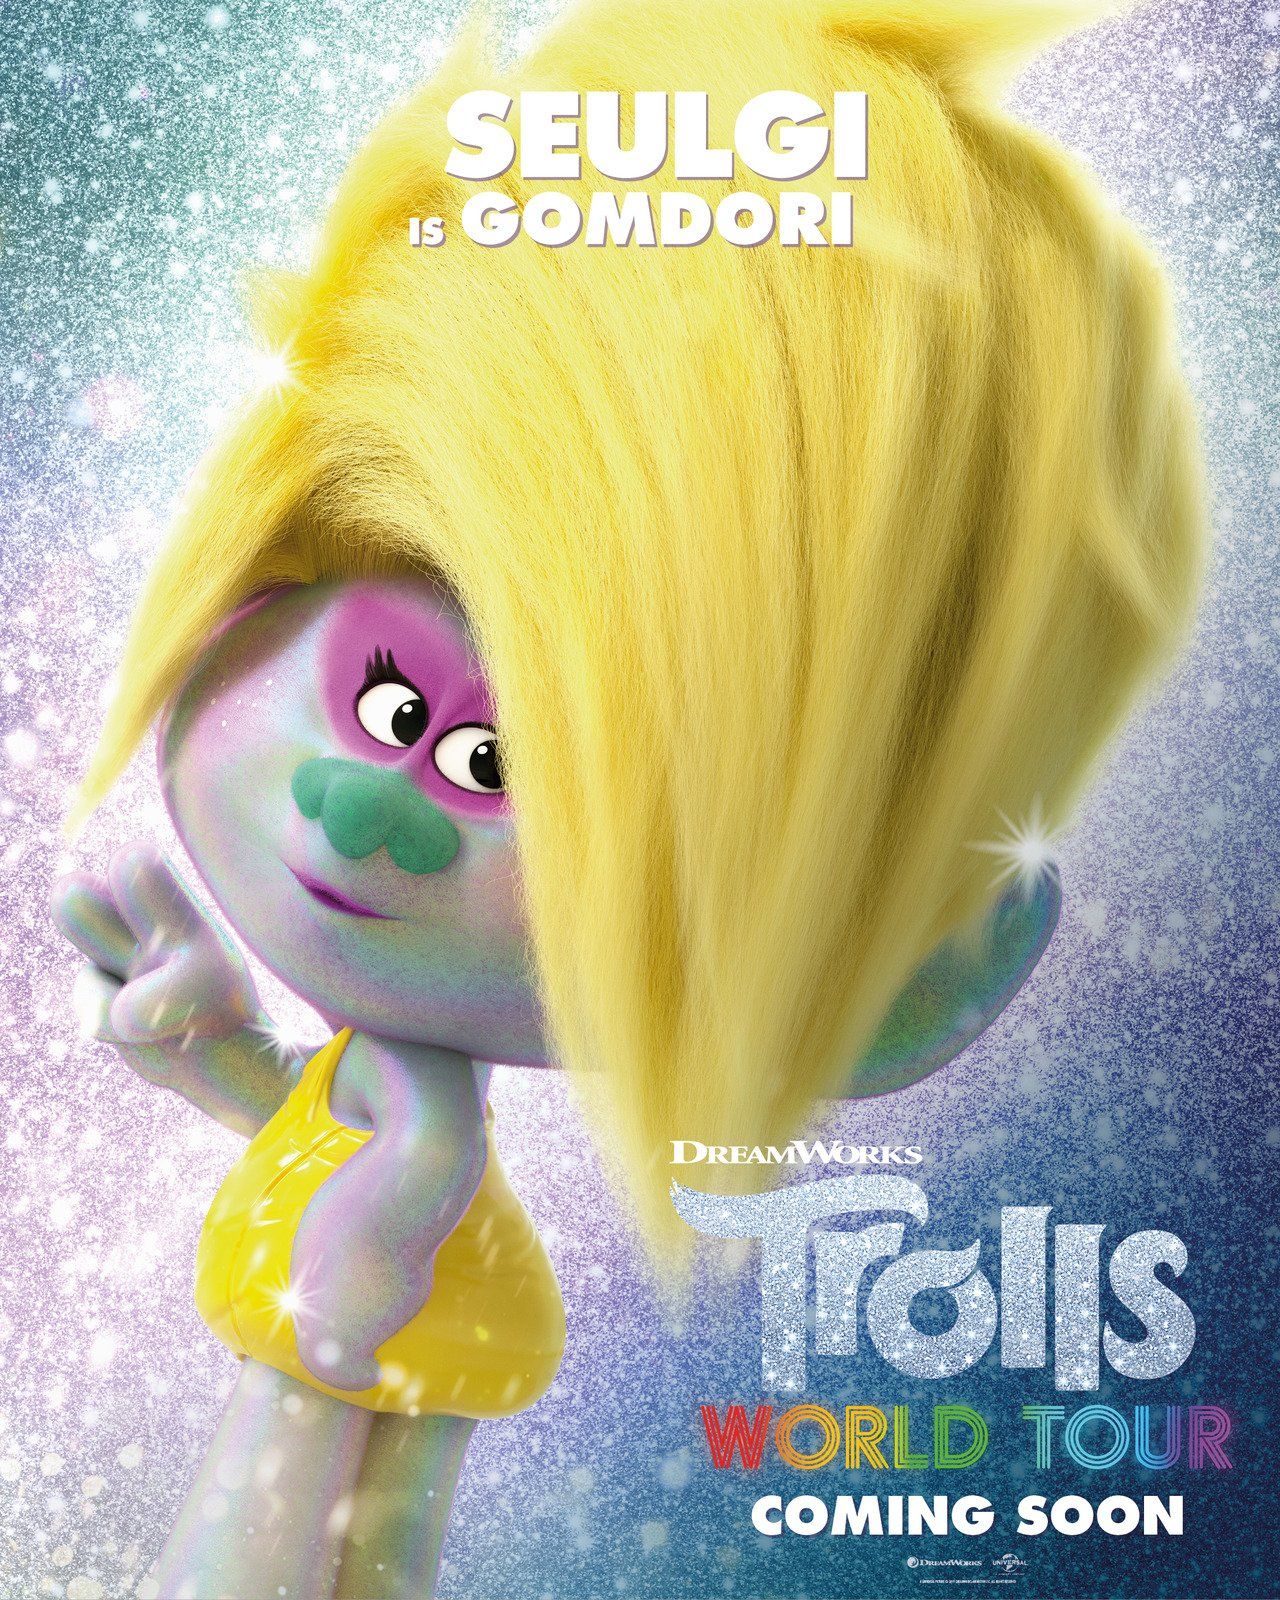 Red Velvet Introduces Their Characters From Upcoming DreamWorks Film “Trolls: World Tour”